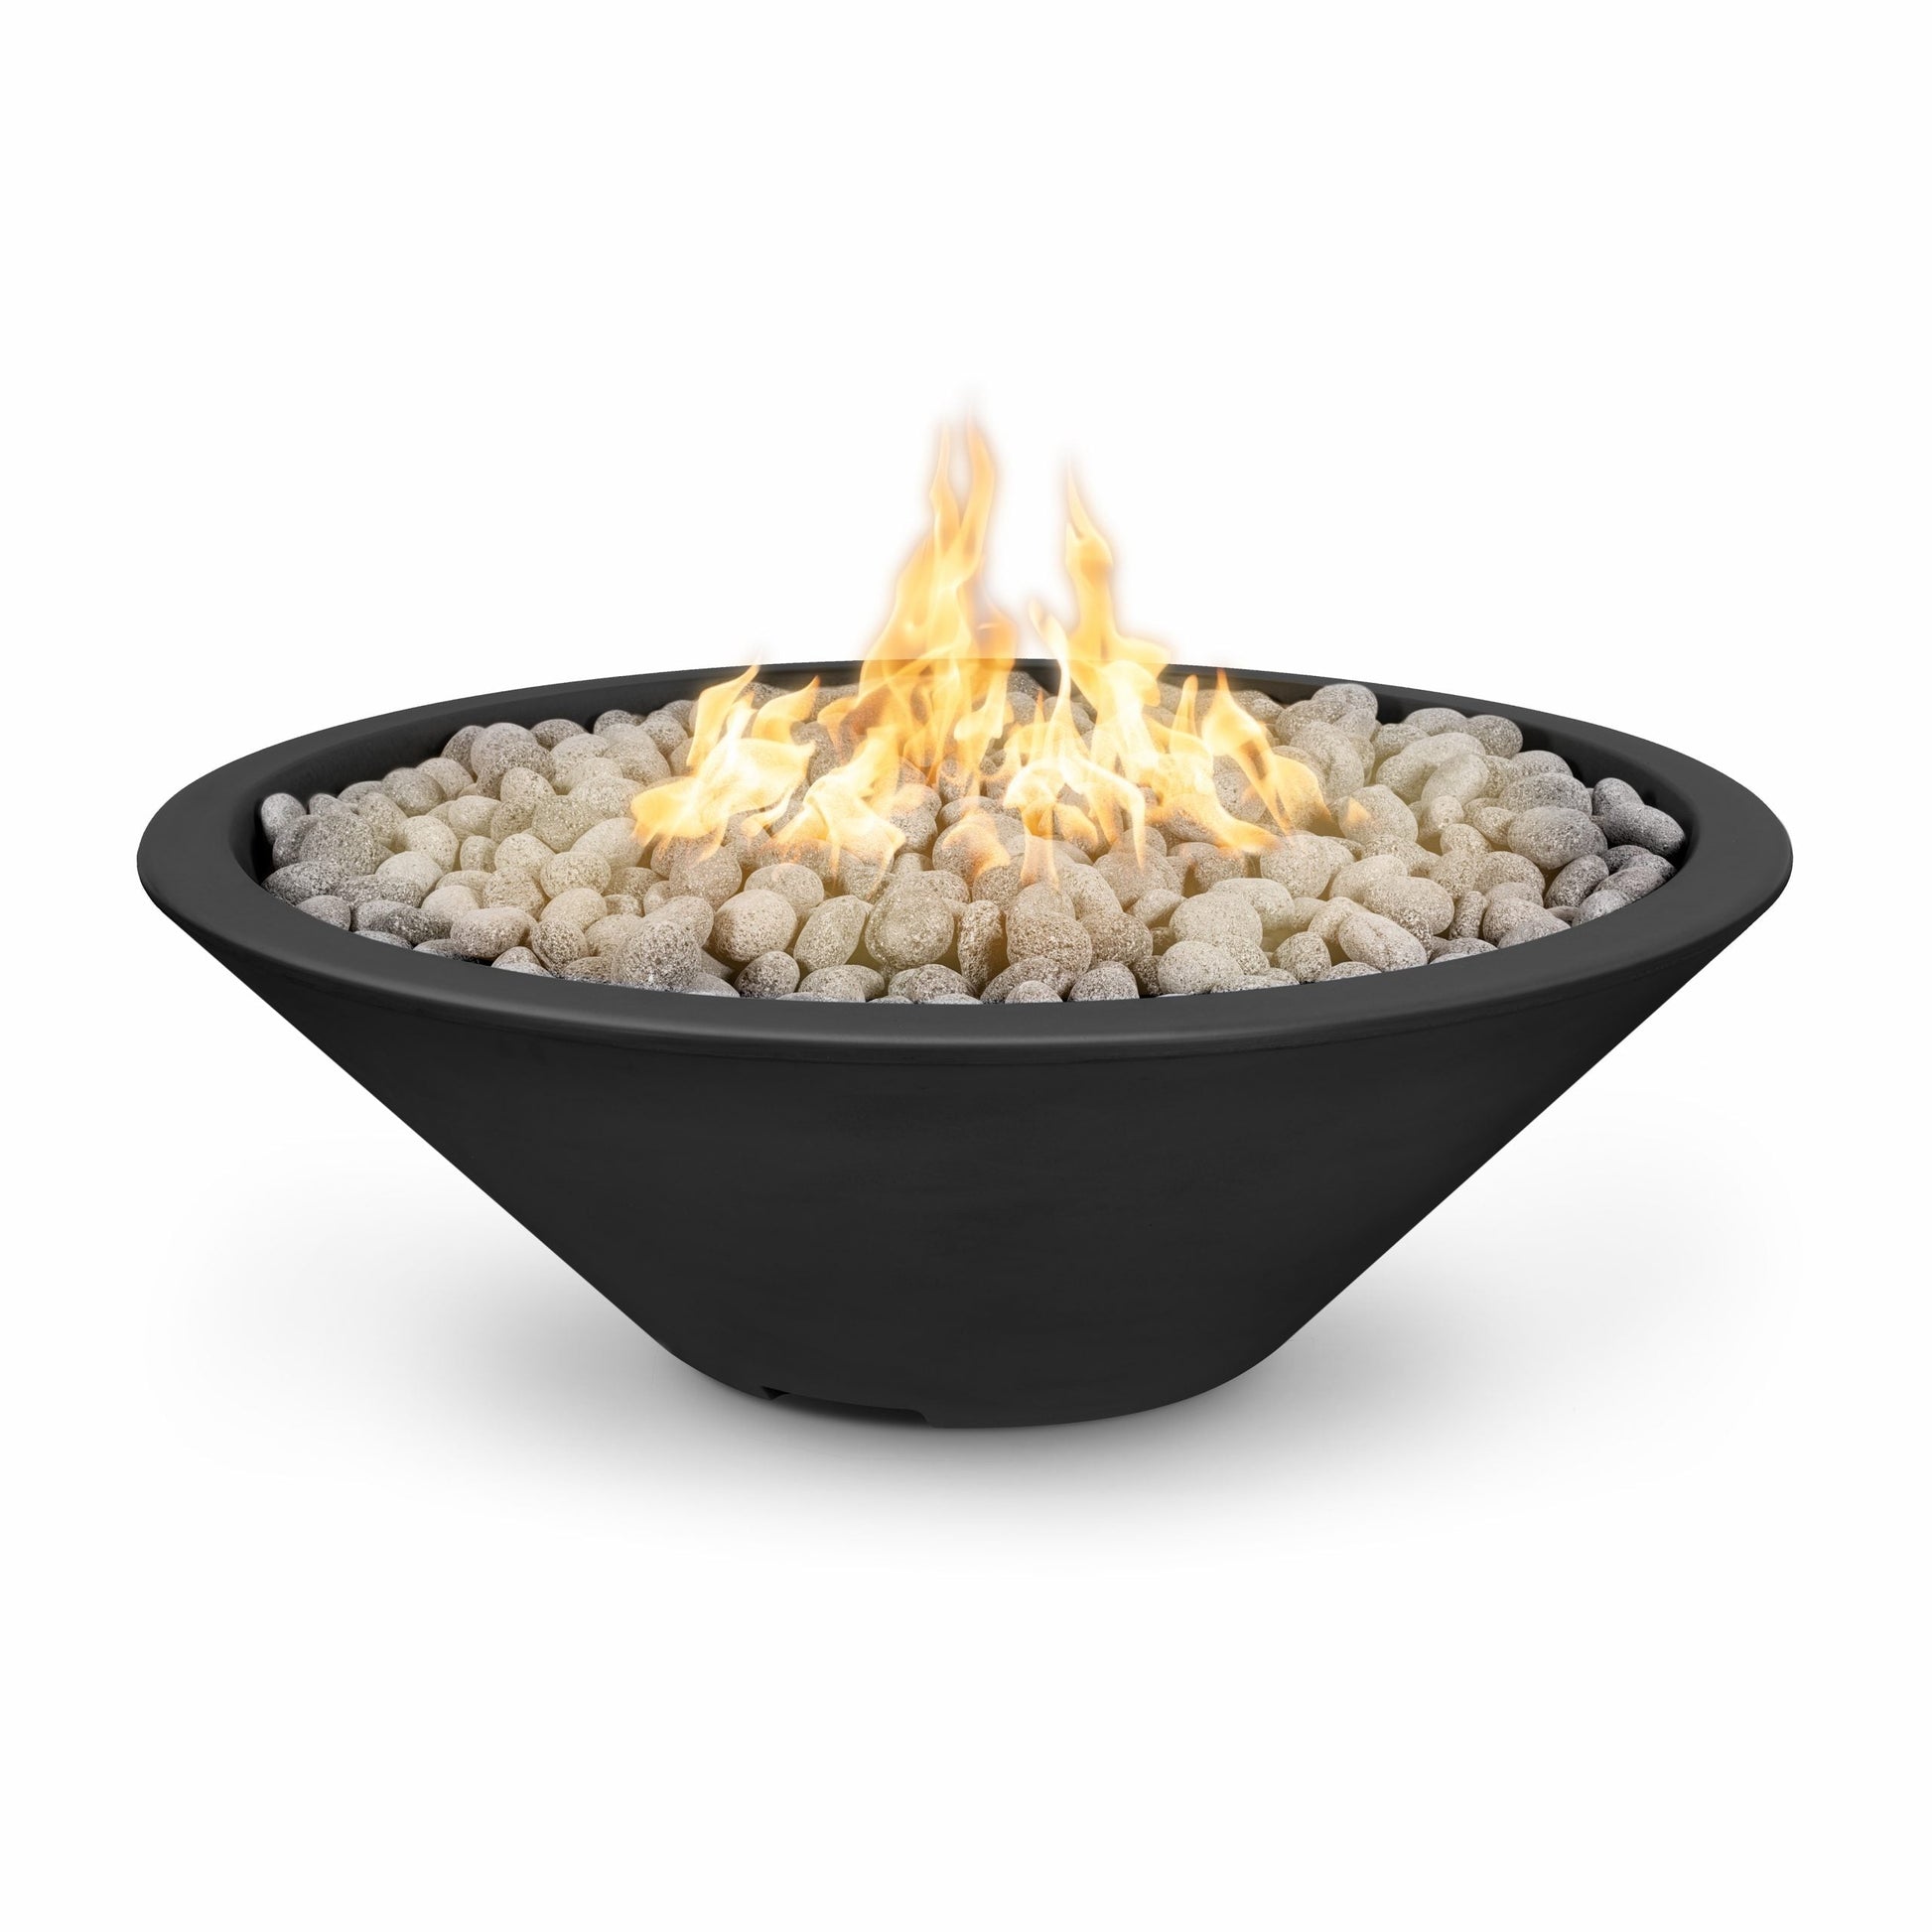 The Outdoor Plus Round Cazo 60" Gray Powder Coated Metal Liquid Propane Fire Pit with 110V Electronic Ignition